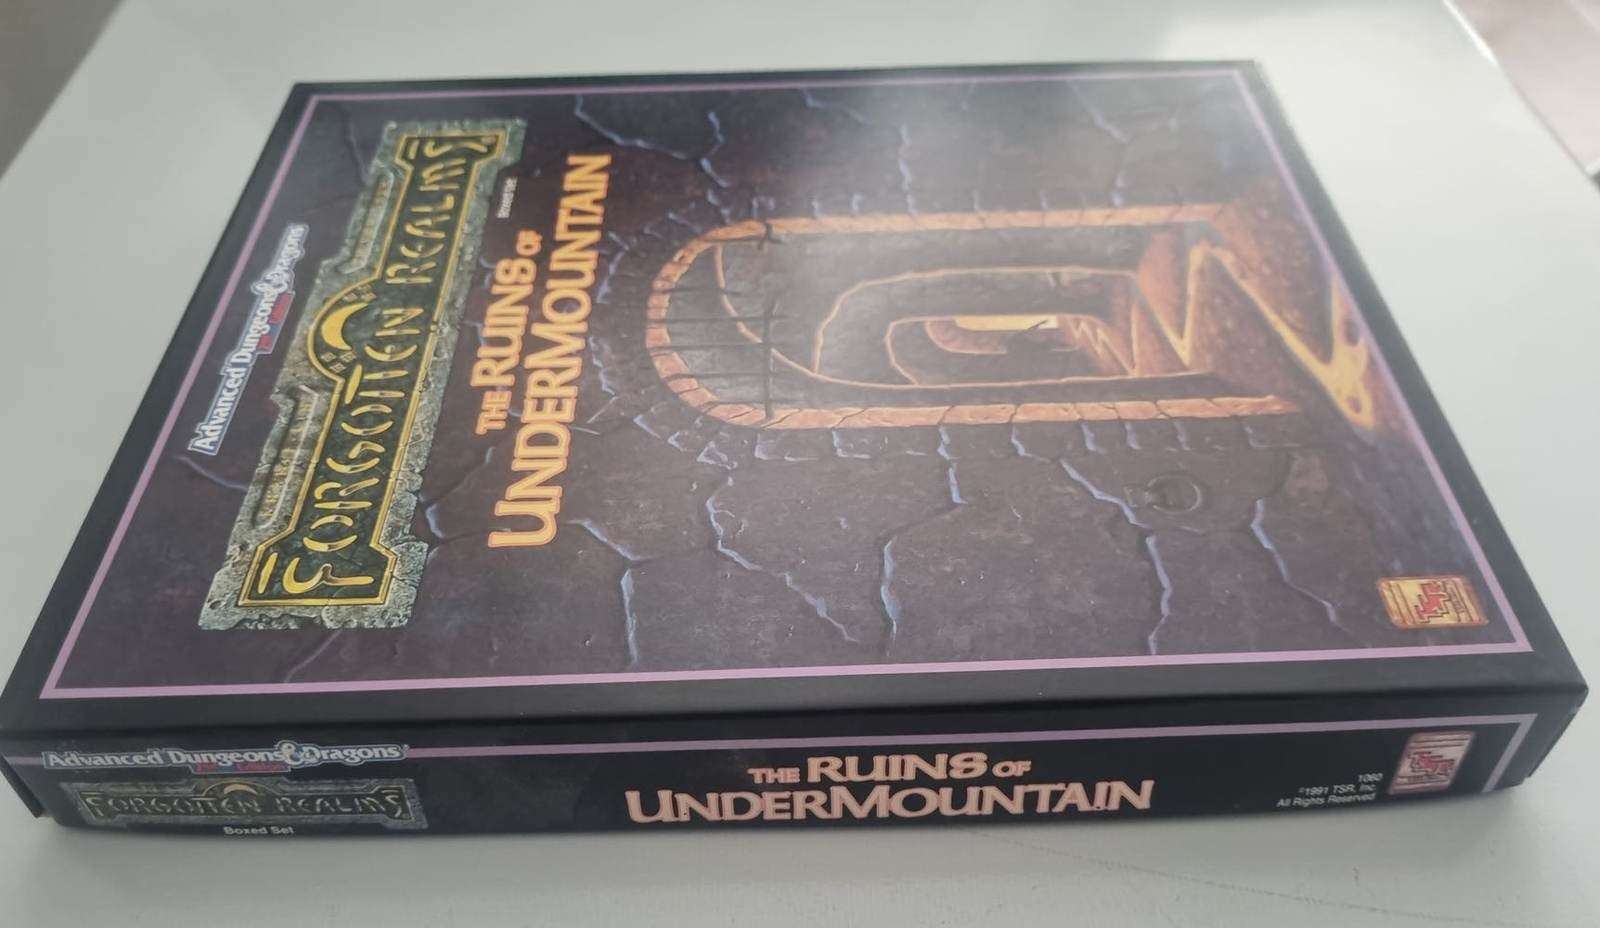 Advanced Dungeons and Dragons: Forgotten Realms - The Ruins of the Undermountain